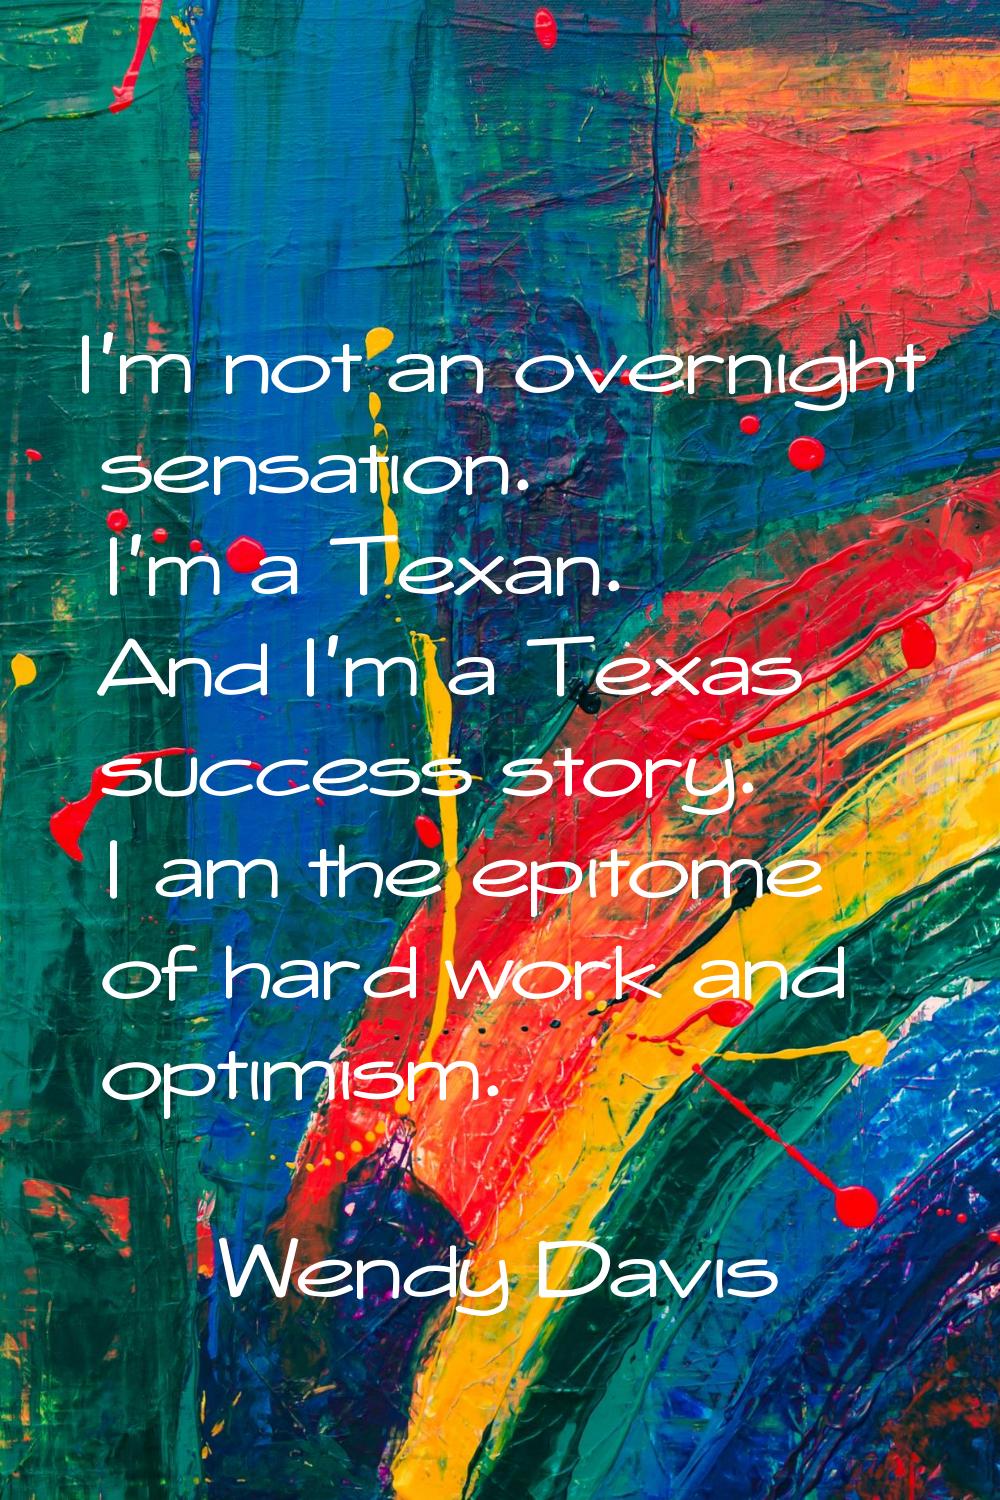 I'm not an overnight sensation. I'm a Texan. And I'm a Texas success story. I am the epitome of har